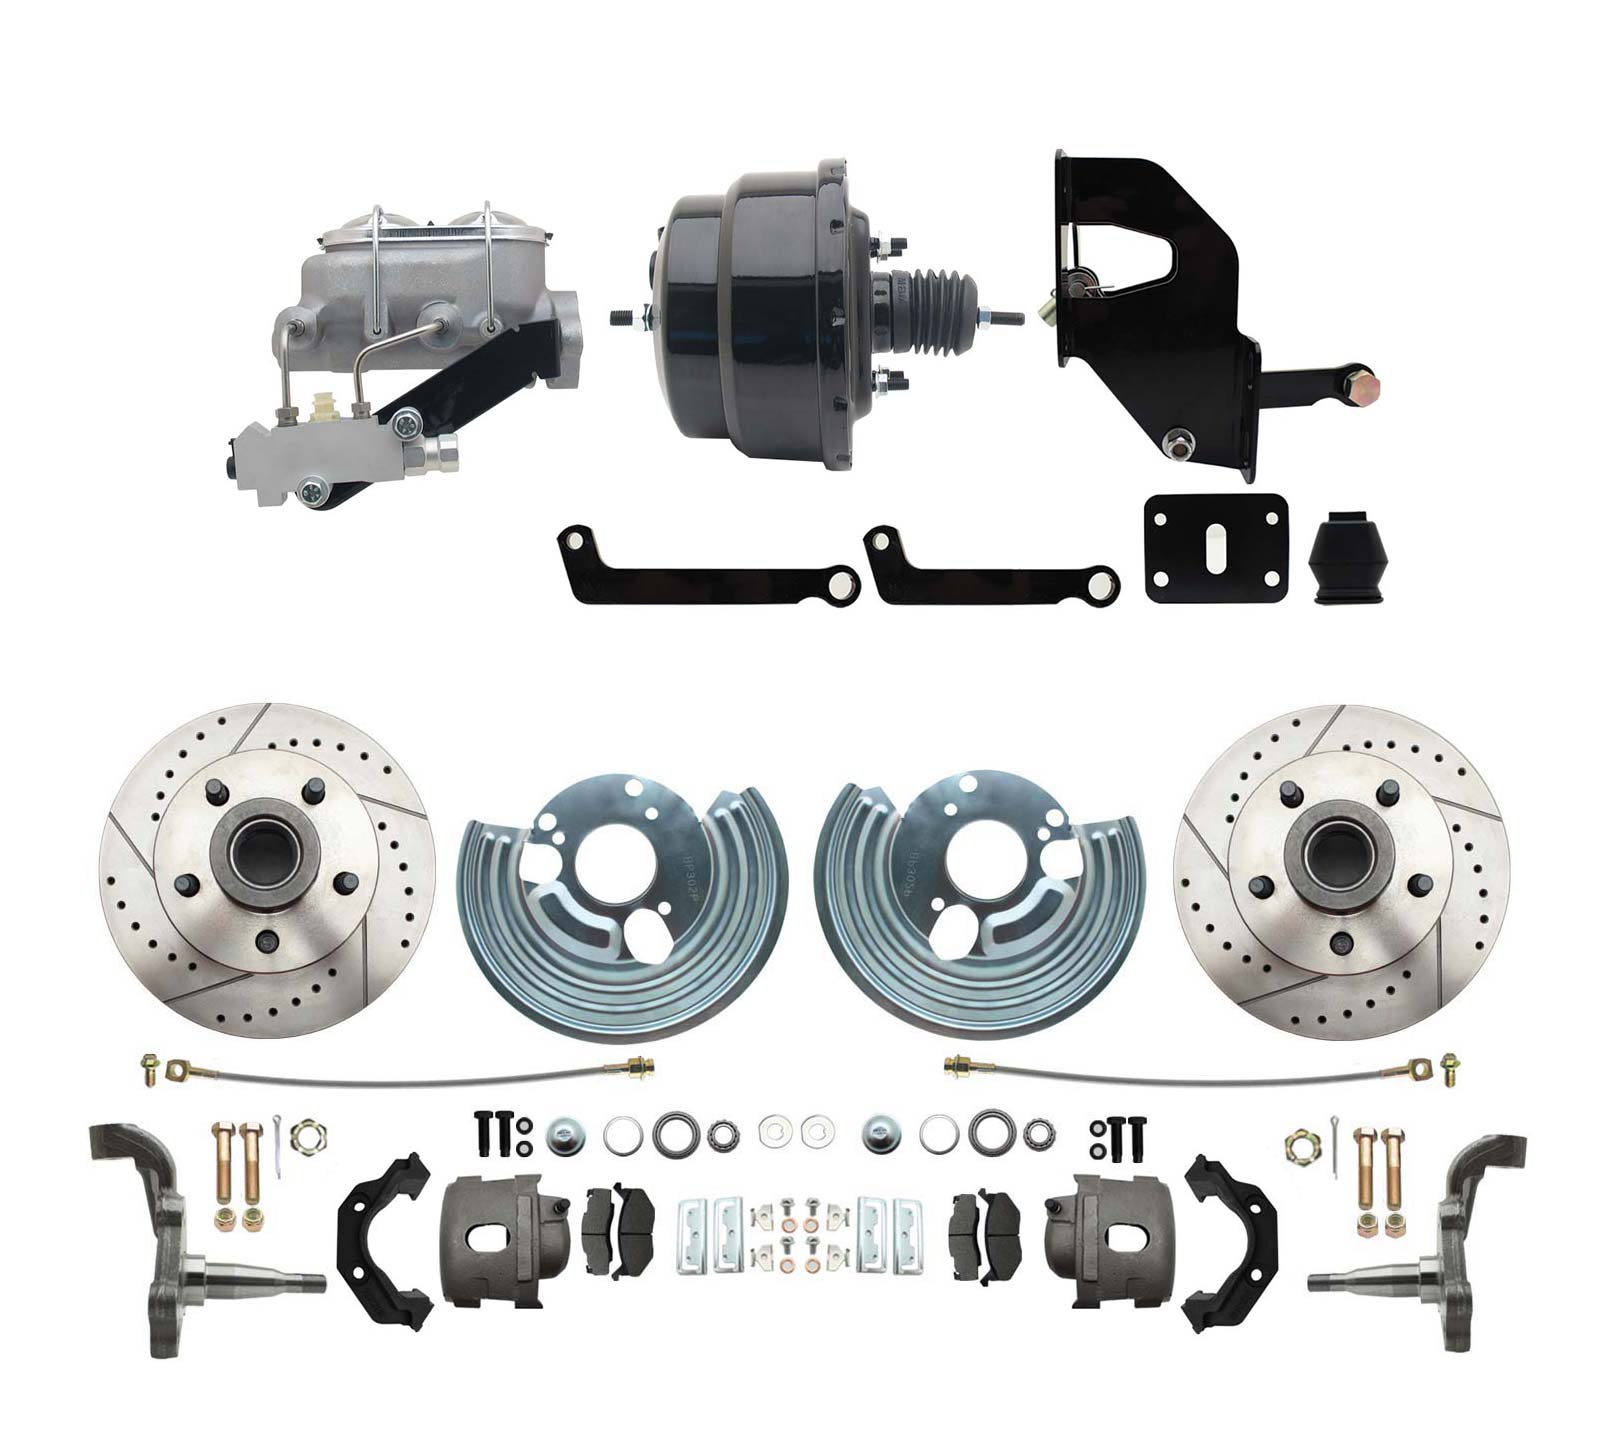 1962-72 Mopar B&E Body Front Disc Brake Conversion Kit W/ Drilled & Slotted Rotors ( Charger, Challenger, Coronet) W/ 8 Dual Powder Coated Black Booster Conversion Kit W/ Aluminum Dual Bail Master Cylinder & Proportioning Valve Kit